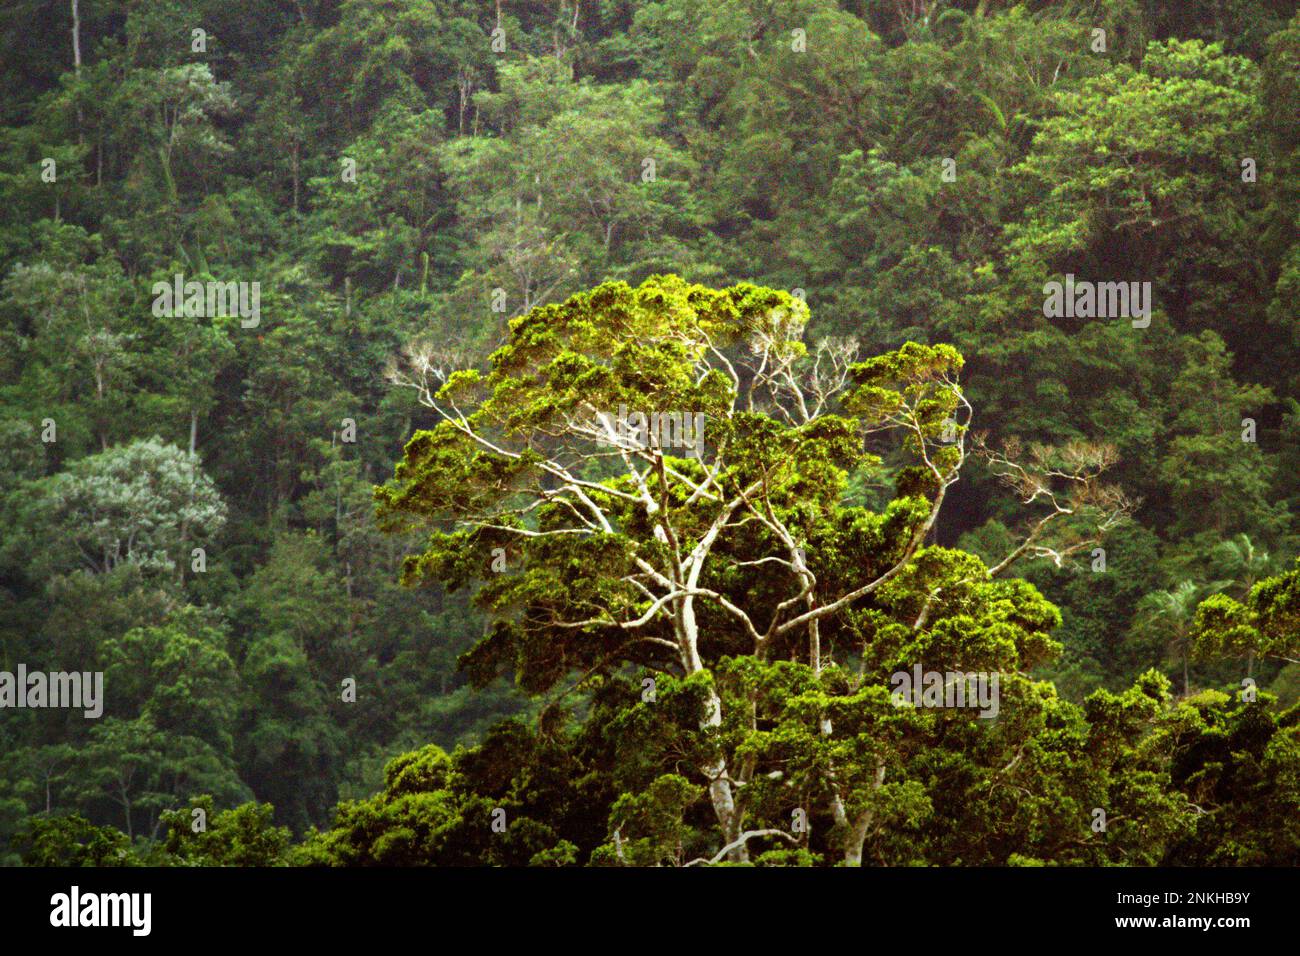 Rainforest at the foot of Mount Duasudara in North Sulawesi, Indonesia. The earth's forests, currently around 4 billion hectares in total, remain a net-sink for carbon dioxide, which collectively emit 8.1 billion metric tons of carbon each year and absorb 16 billion metric tons, according to Jennifer Fergesen in her article published on Time on October 18, 2022. Southeast Asia's tropical rainforests are one of the world's three largest systems that are the lungs of the earth, along with the Amazon and Congo River Basin. Stock Photo